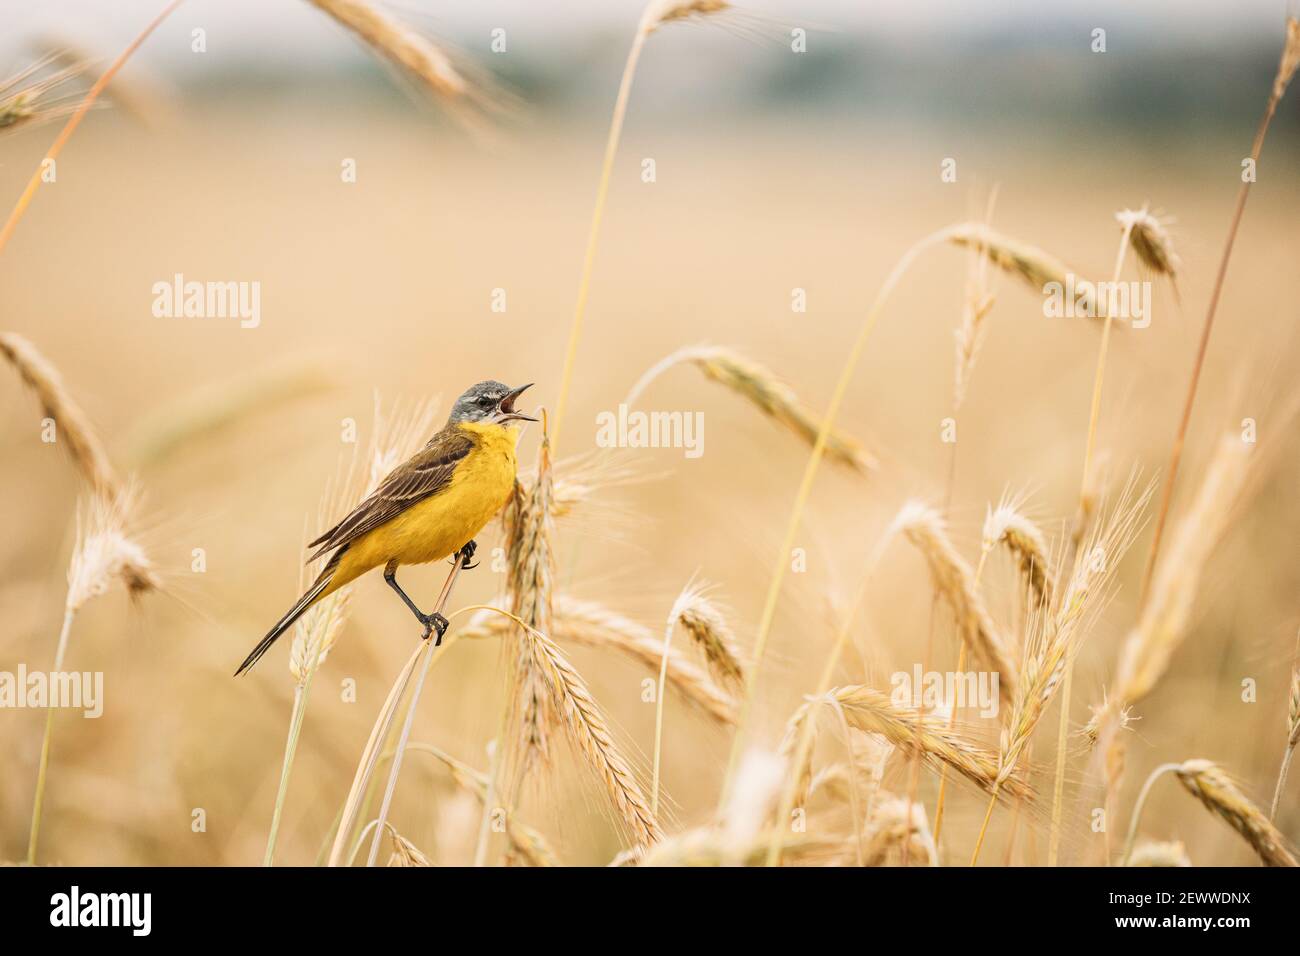 Western Yellow Wagtail. Motacilla Flava Is A Small Passerine In The Wagtail Family Motacillidae, Which Also Includes The Pipits And Longclaws. This Stock Photo